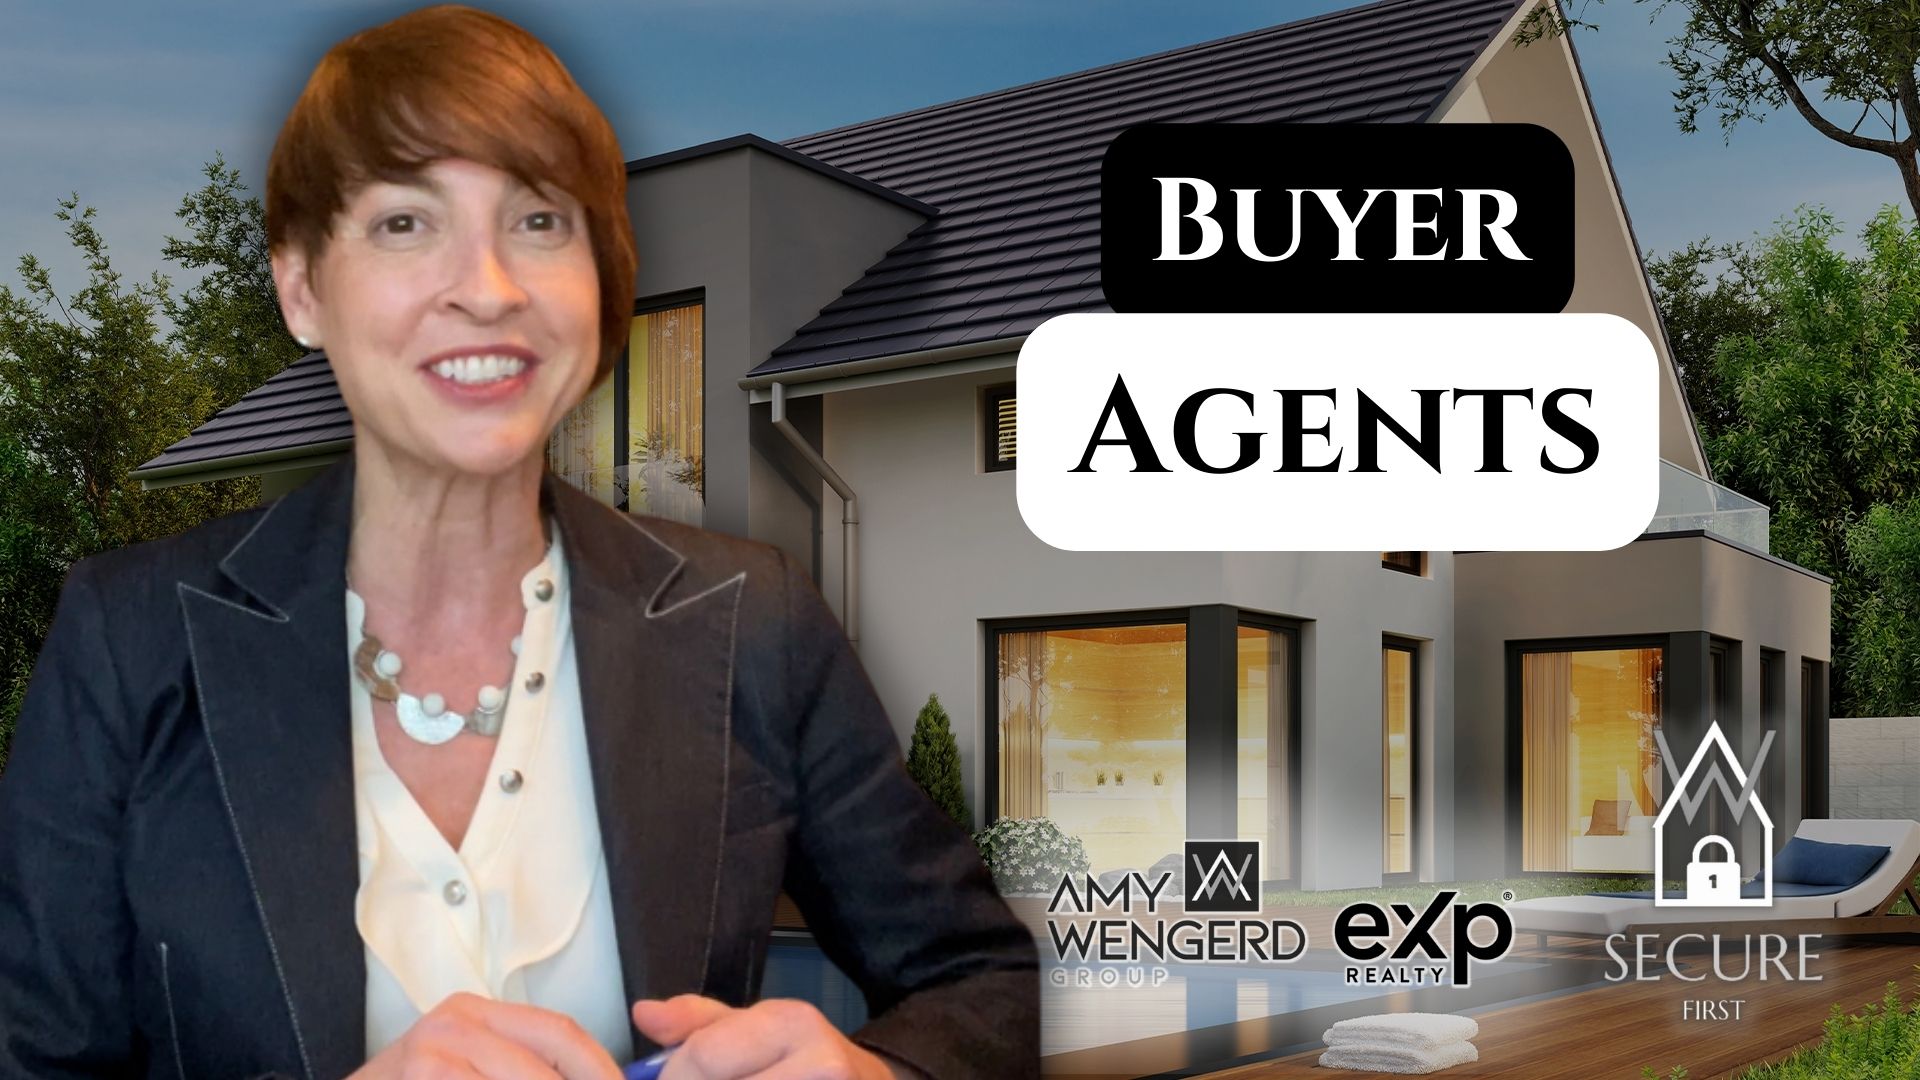 How Our Buyer Agents Ensure Maximum Savings for Homebuyers